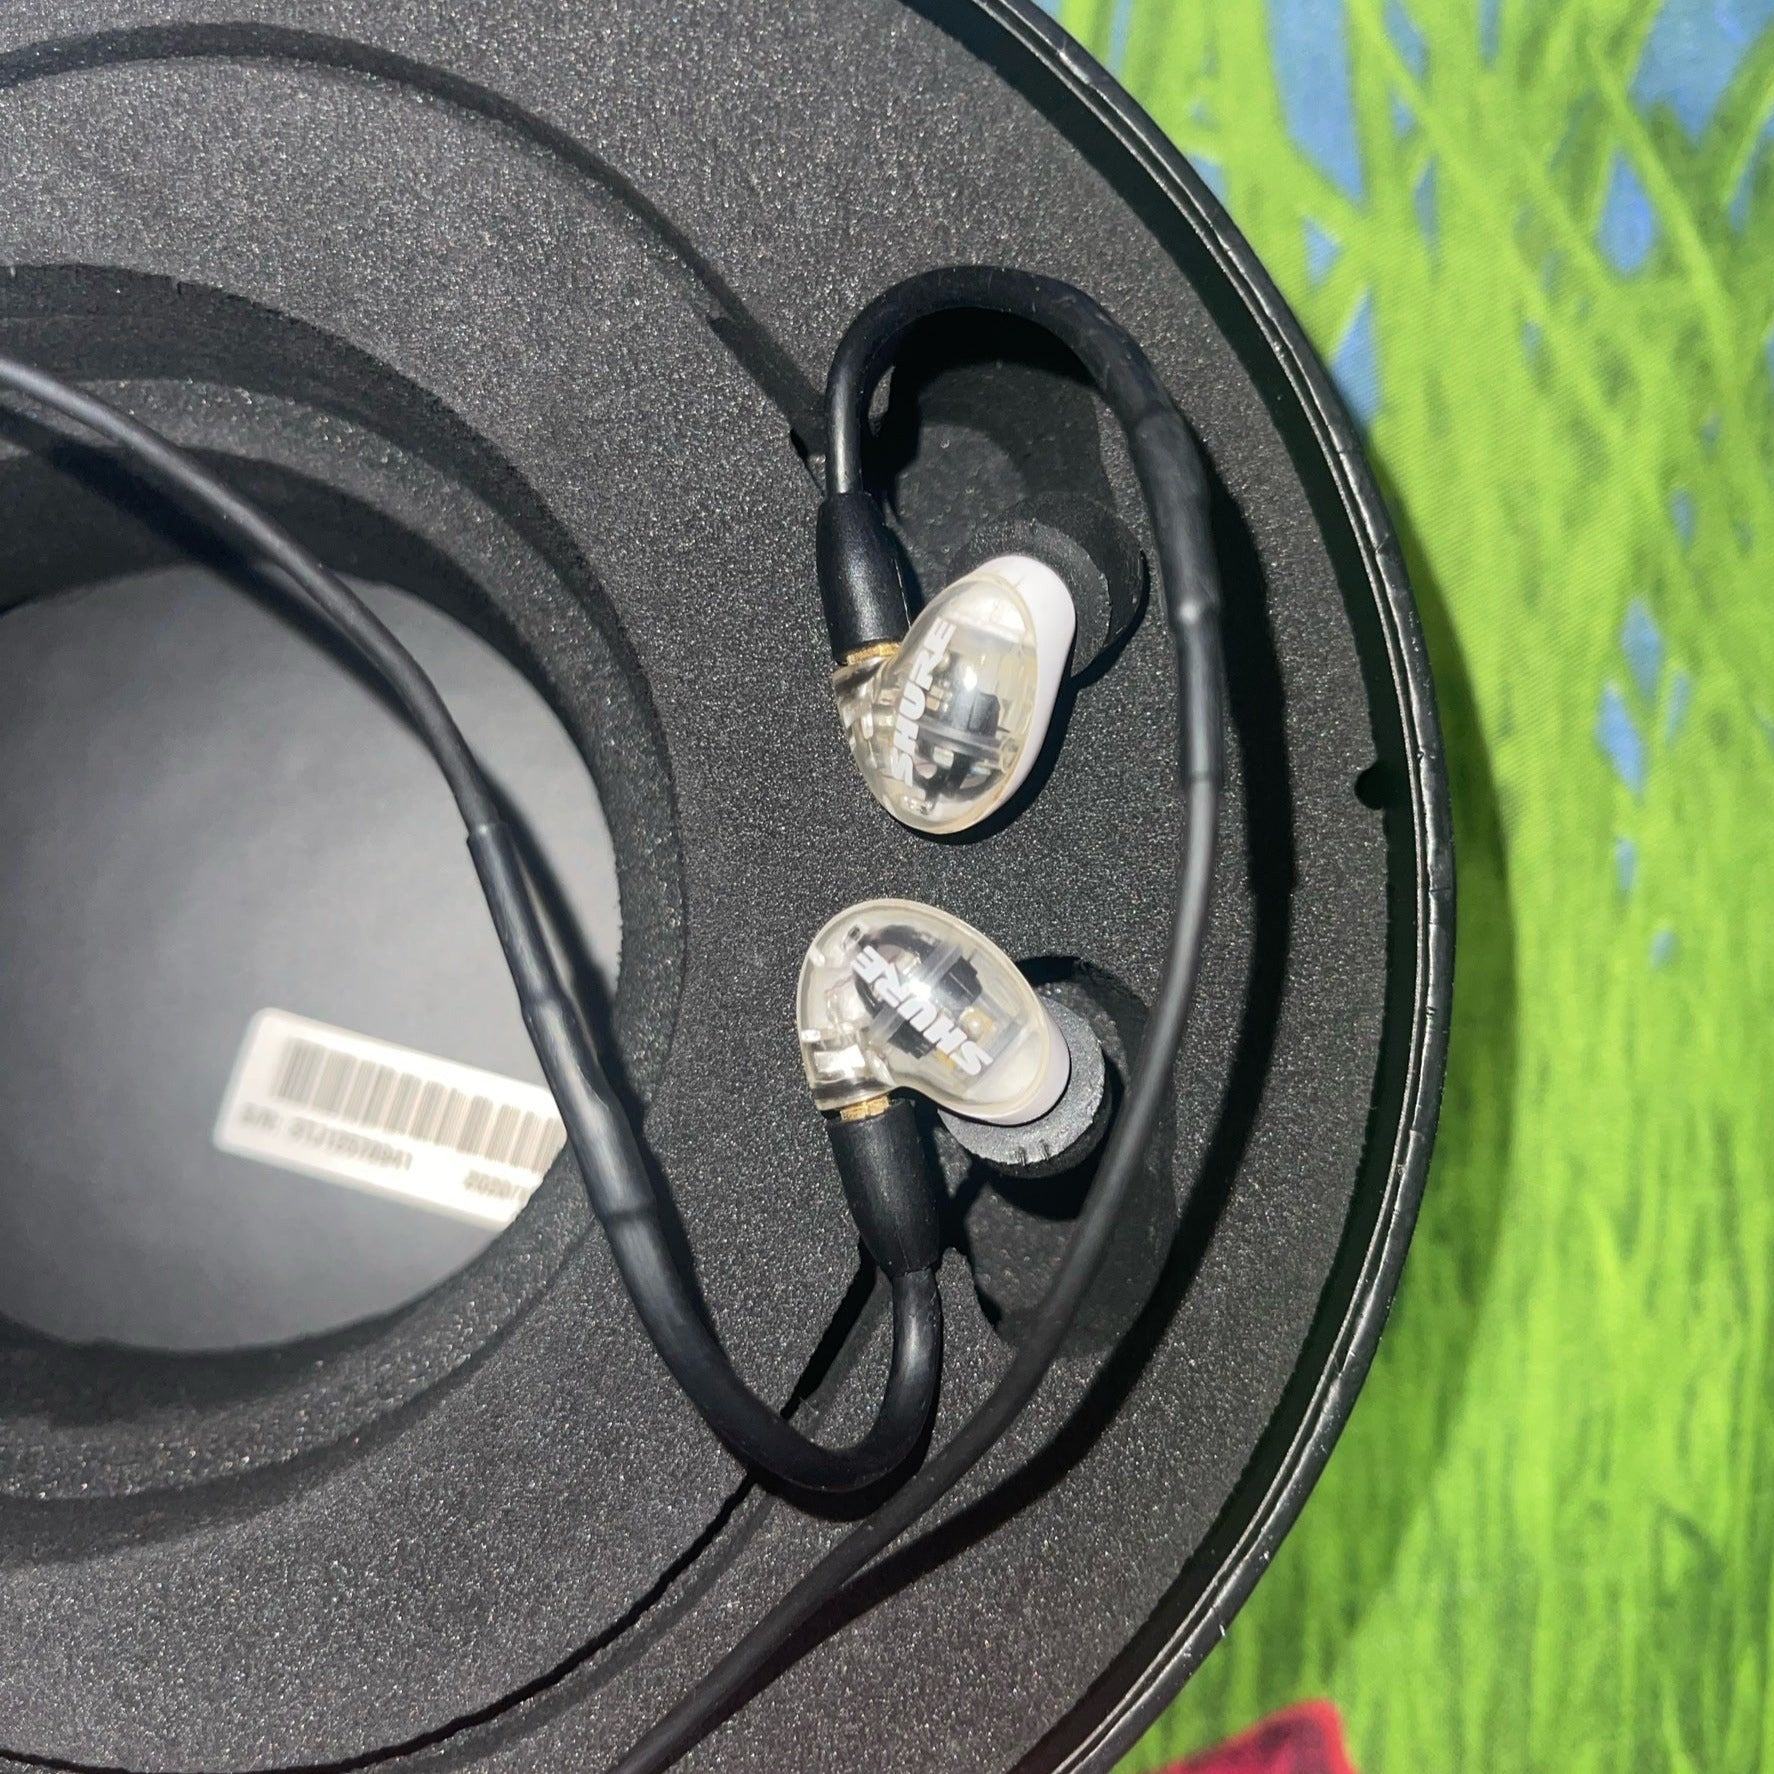 Shure - AONIC 4 (Pre-Owned)